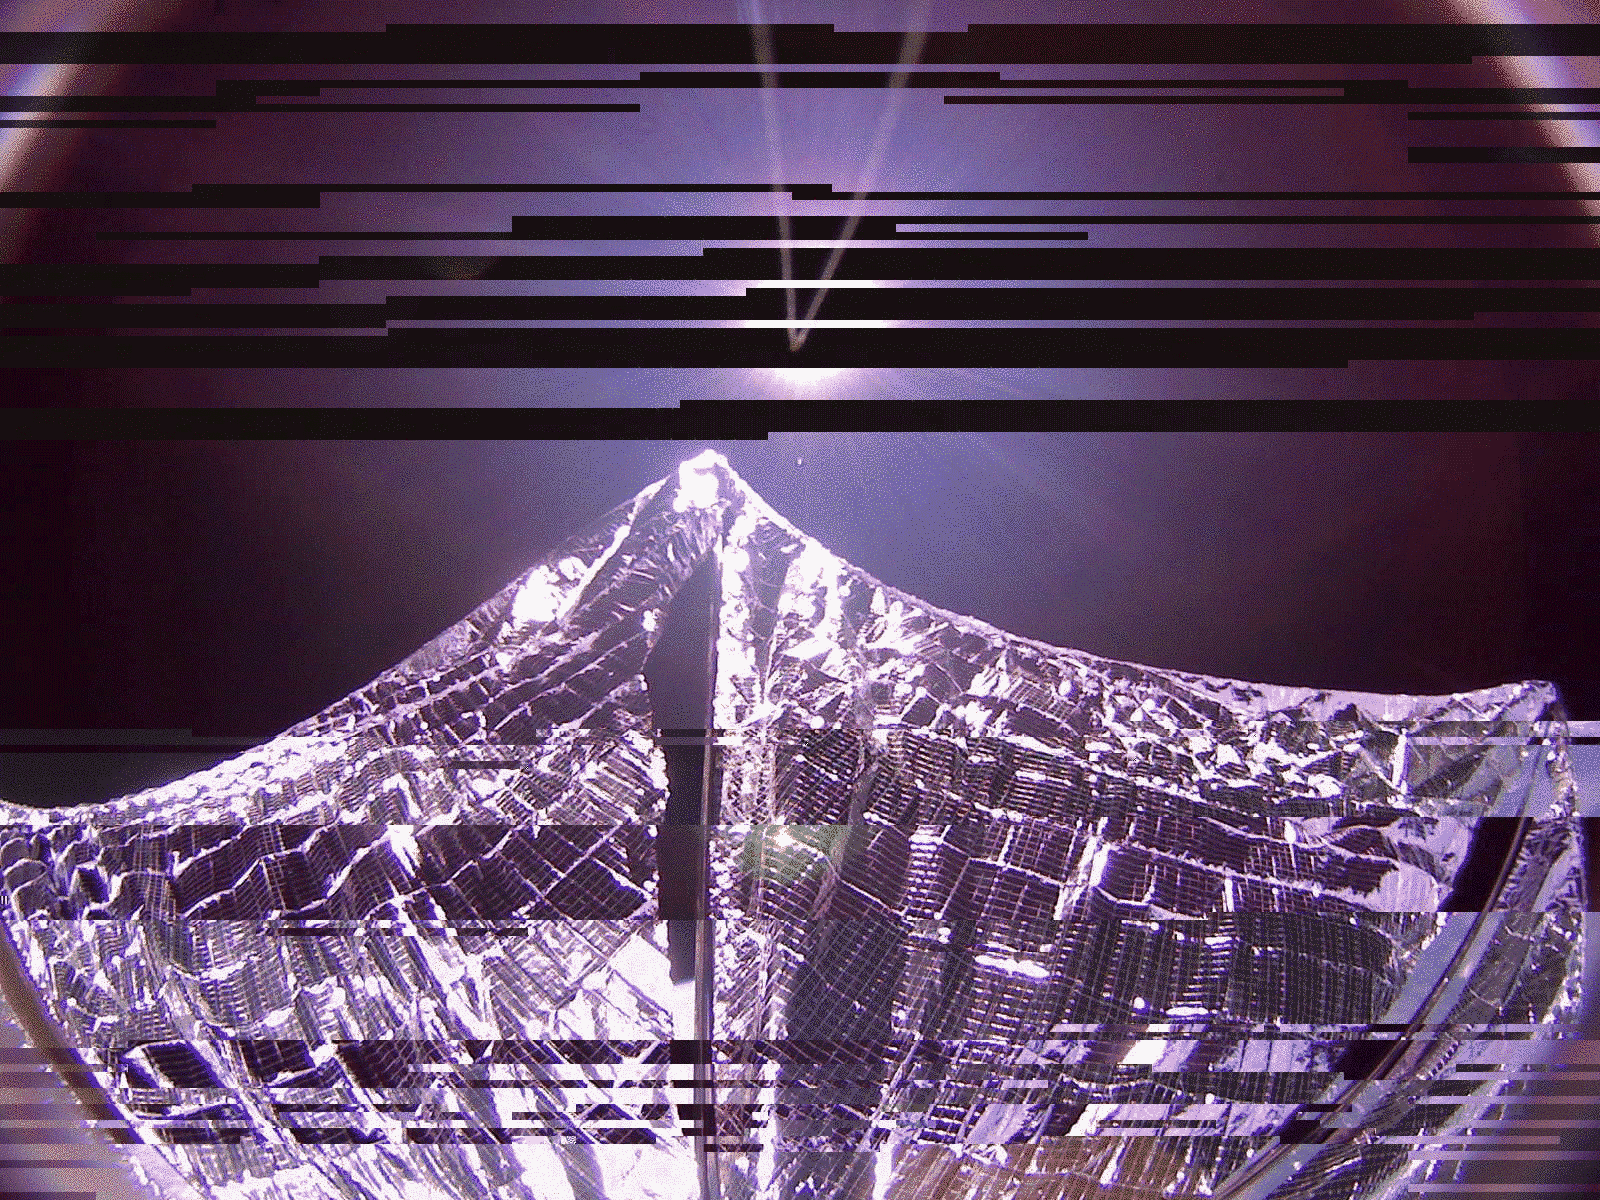 LightSail partial image 2, overlaid on full sails-out image